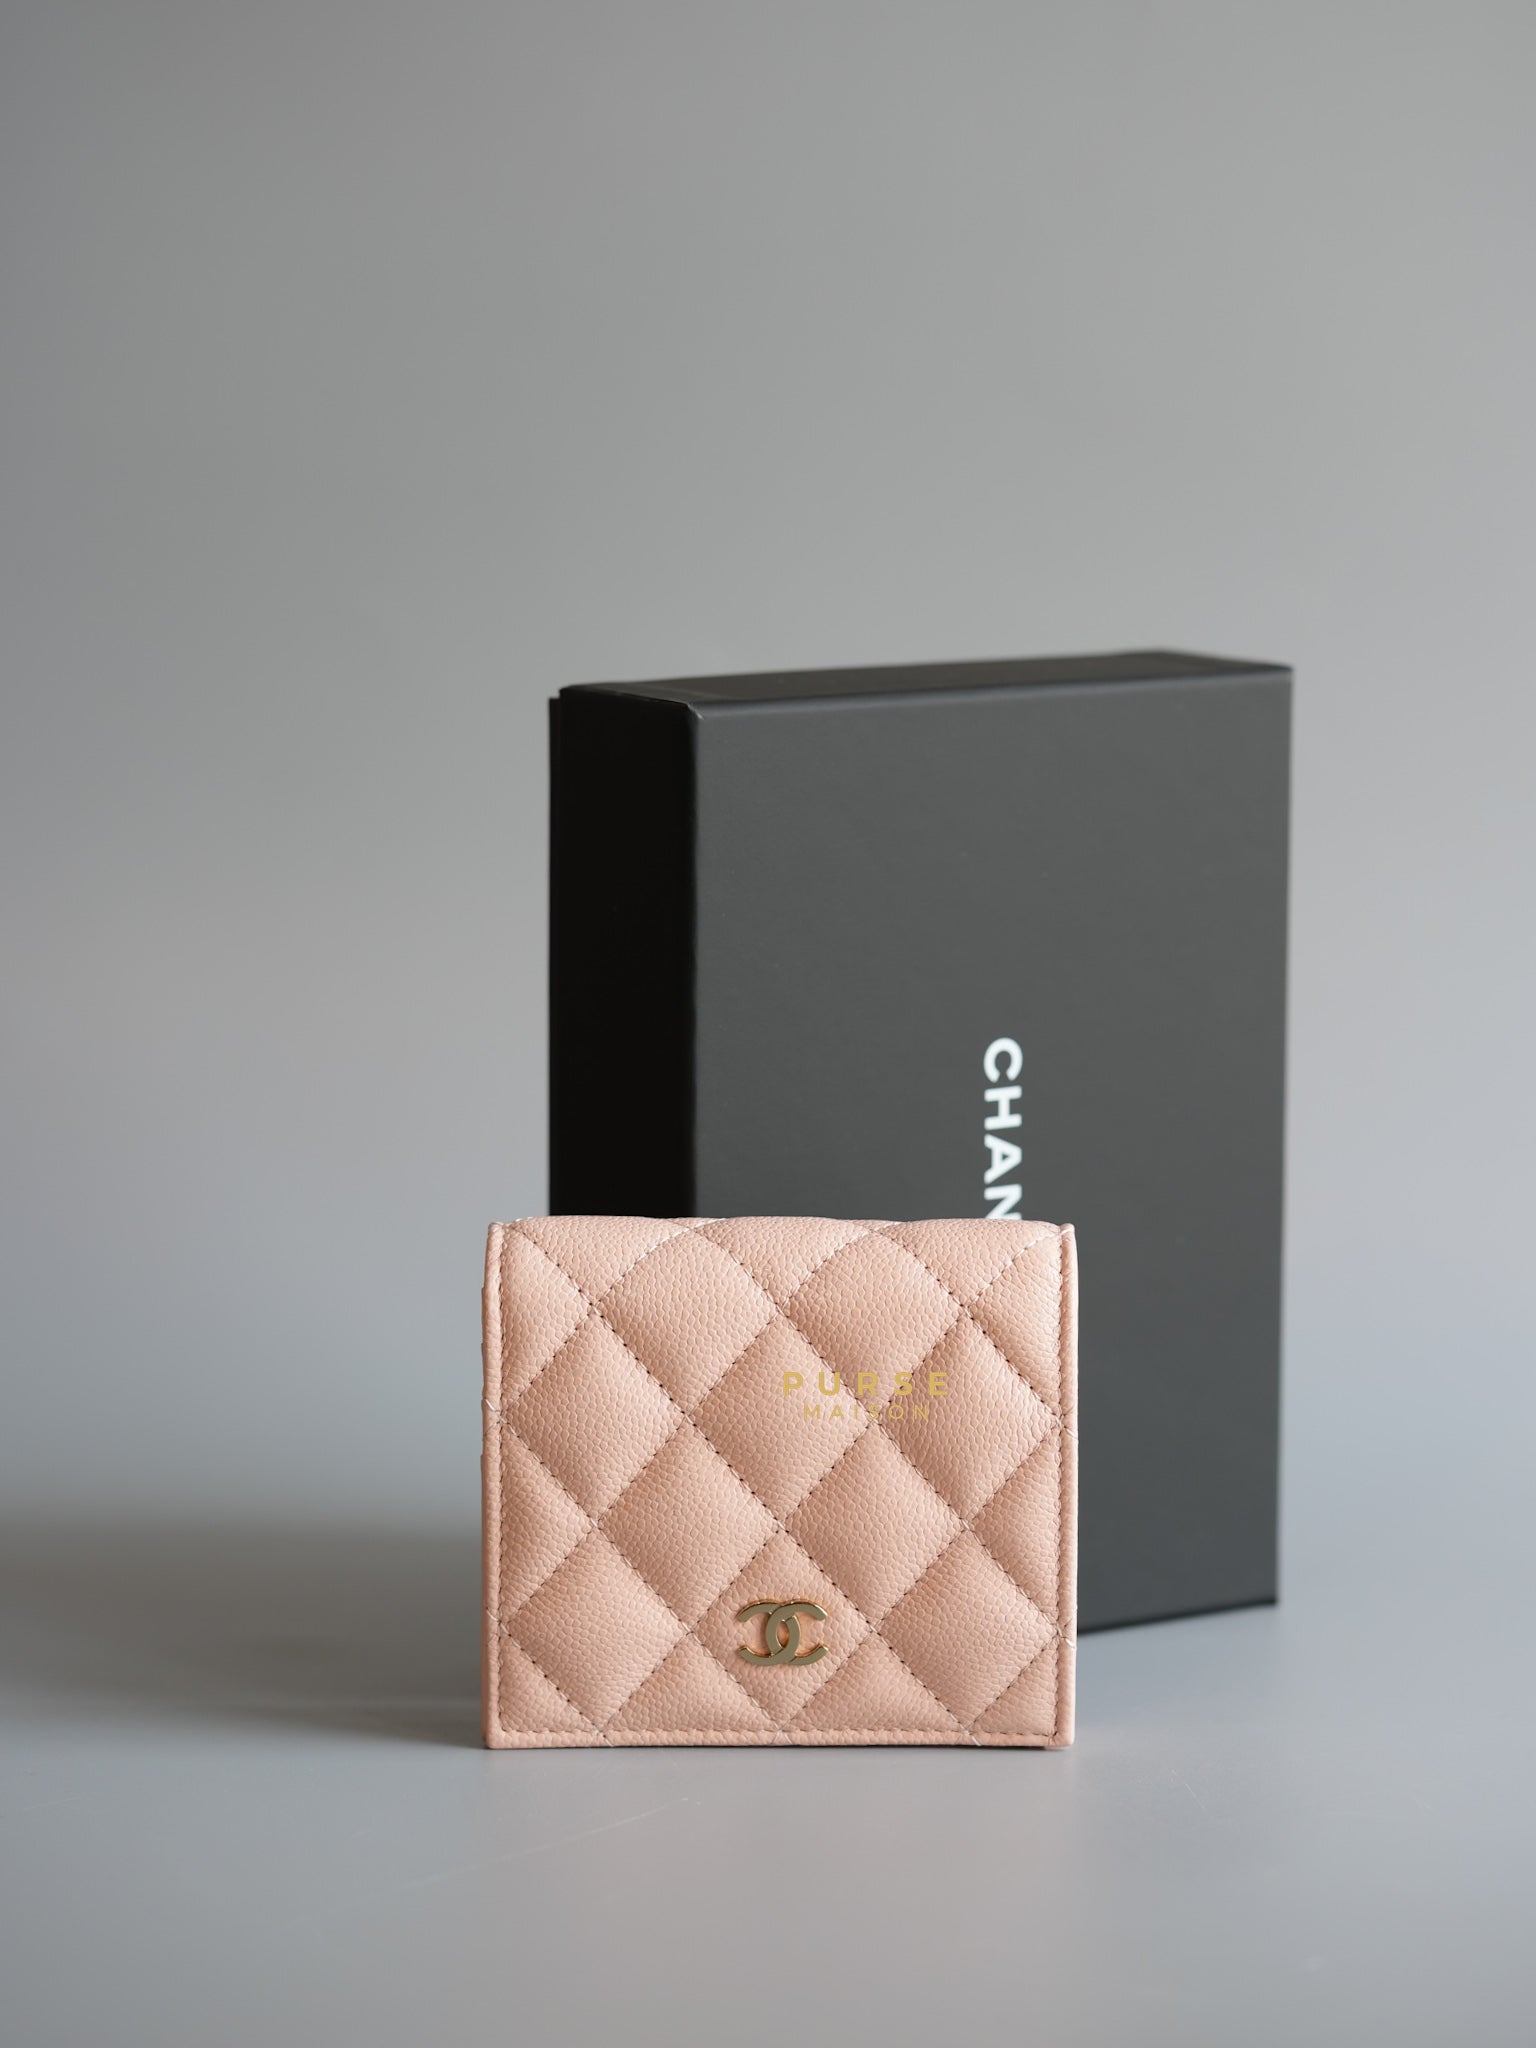 24C Cruise Folding Wallet in Peachy Pink Caviar Leather and Gold Hardware (microchip) | Purse Maison Luxury Bags Shop